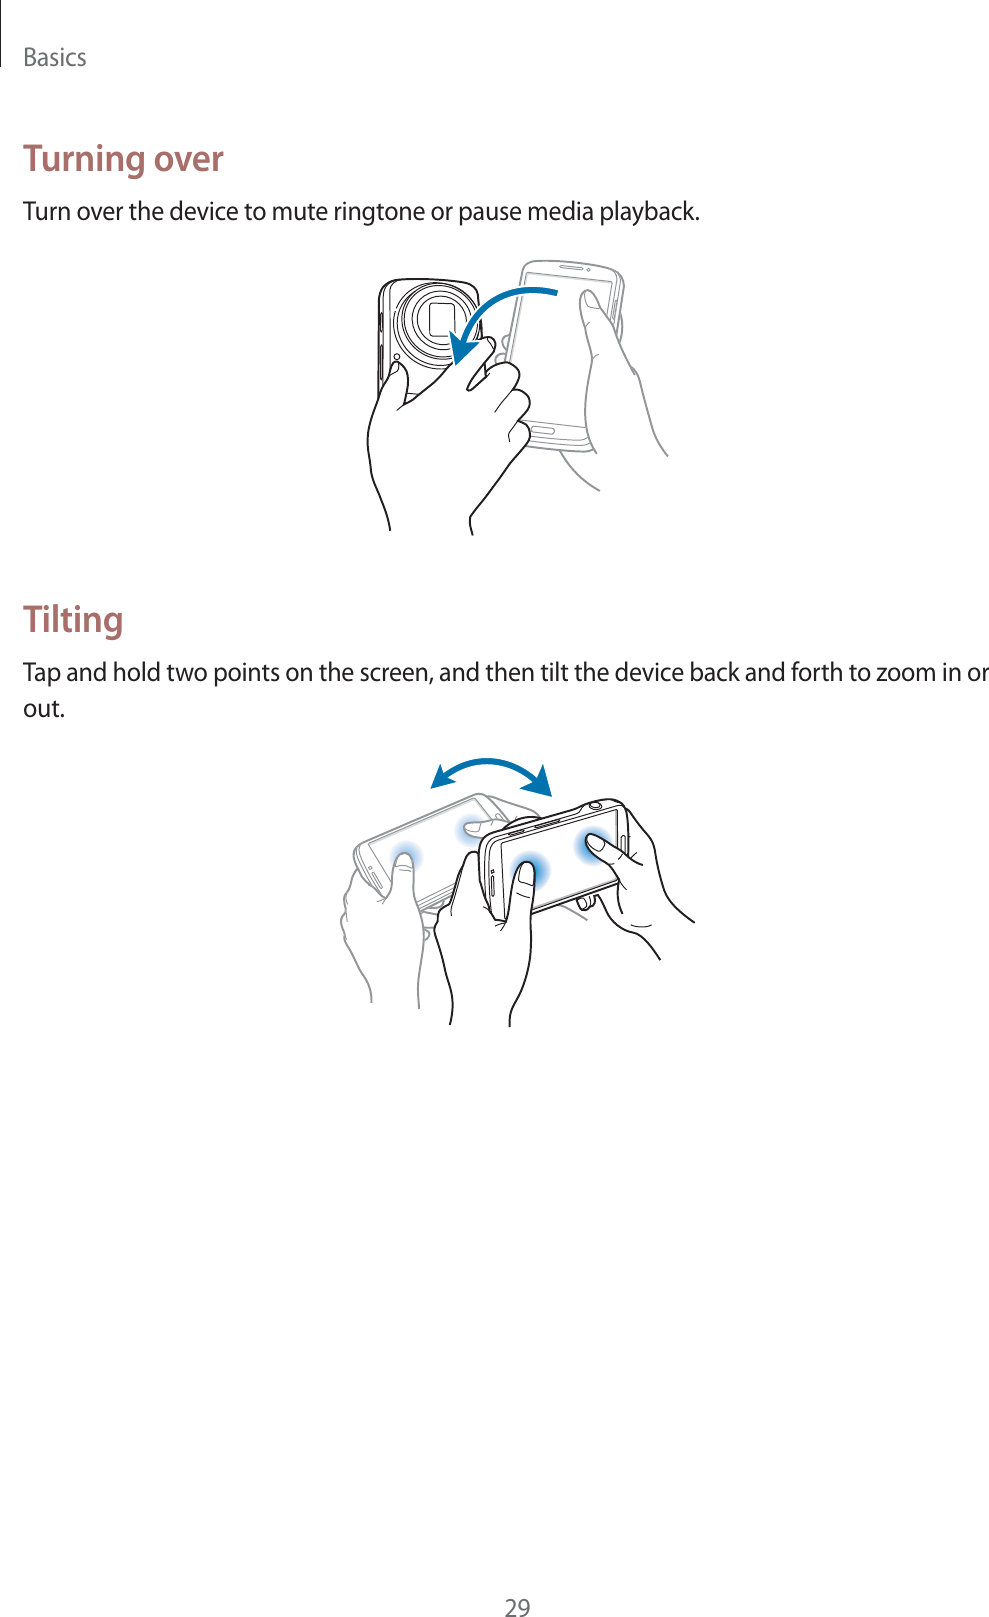 Basics29Turning overTurn over the device to mute ringtone or pause media playback.TiltingTap and hold two points on the screen, and then tilt the device back and forth to zoom in or out.